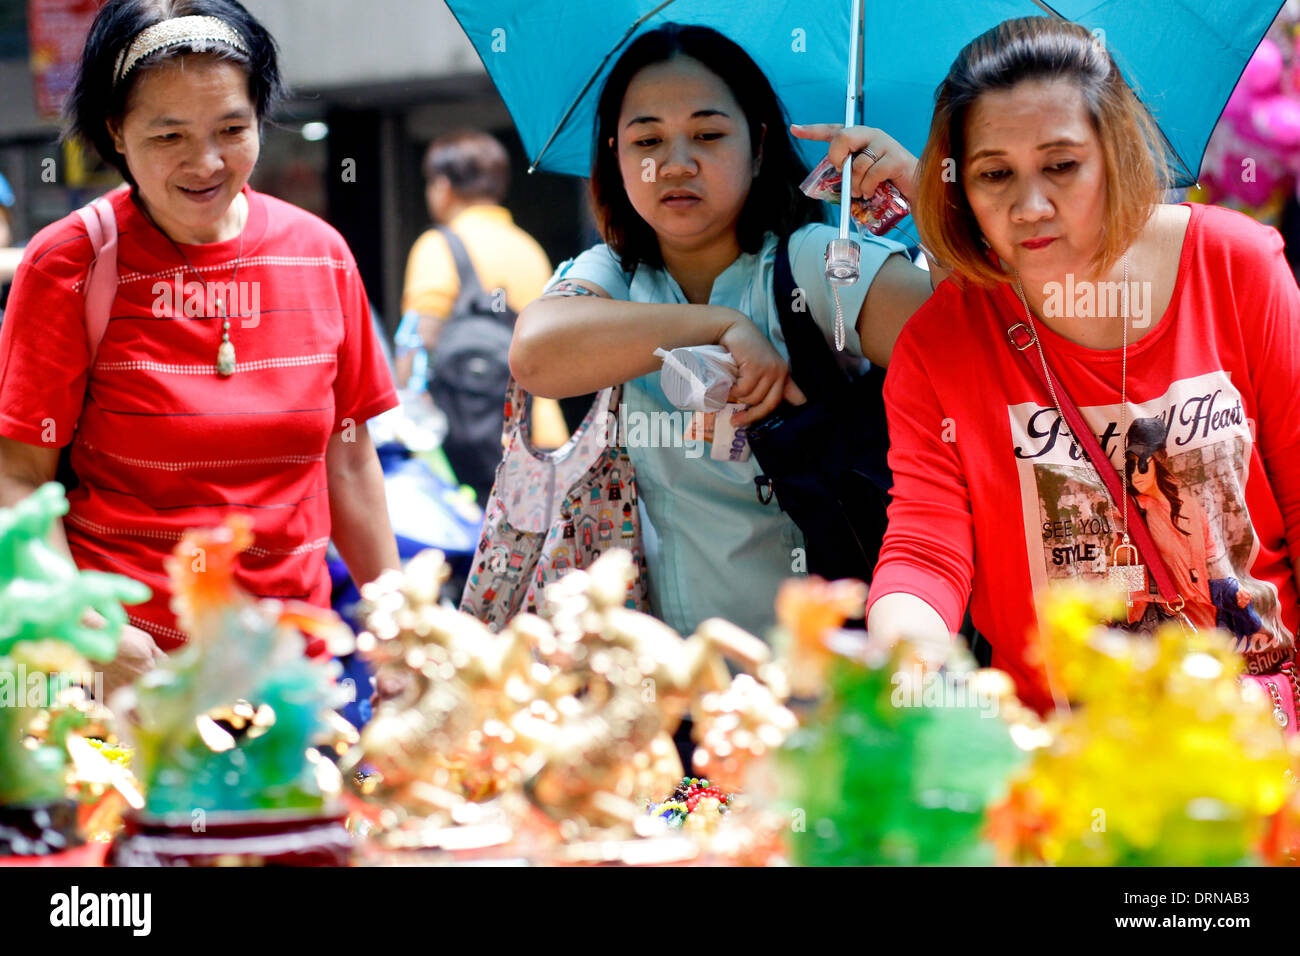 Manila, Phillipines. 30th January 2014. A woman shops for lucky charms in Chinatown Manila on January 30, 2014 a day before Chinese New Year, the Year of the Horse. Photo by Mark Cristino/Alamy Live News Stock Photo